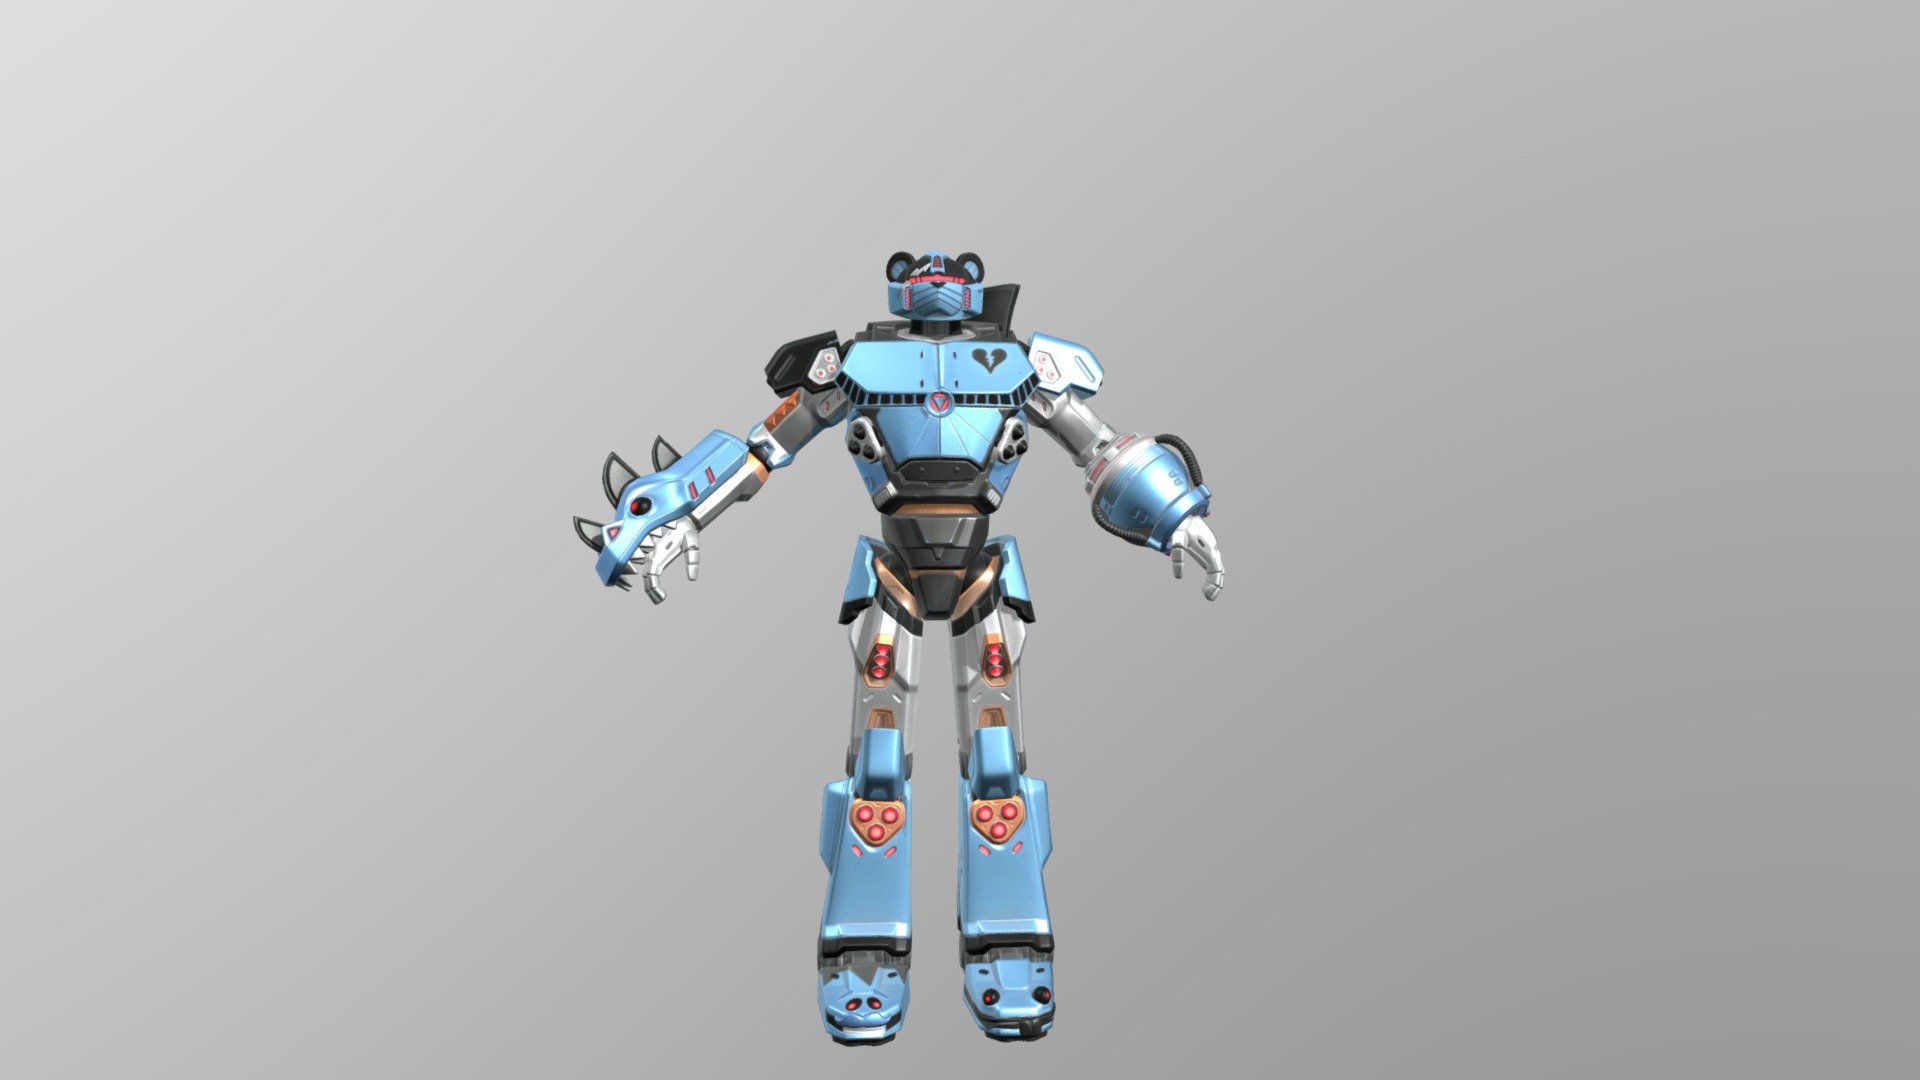 The Mech of the event 